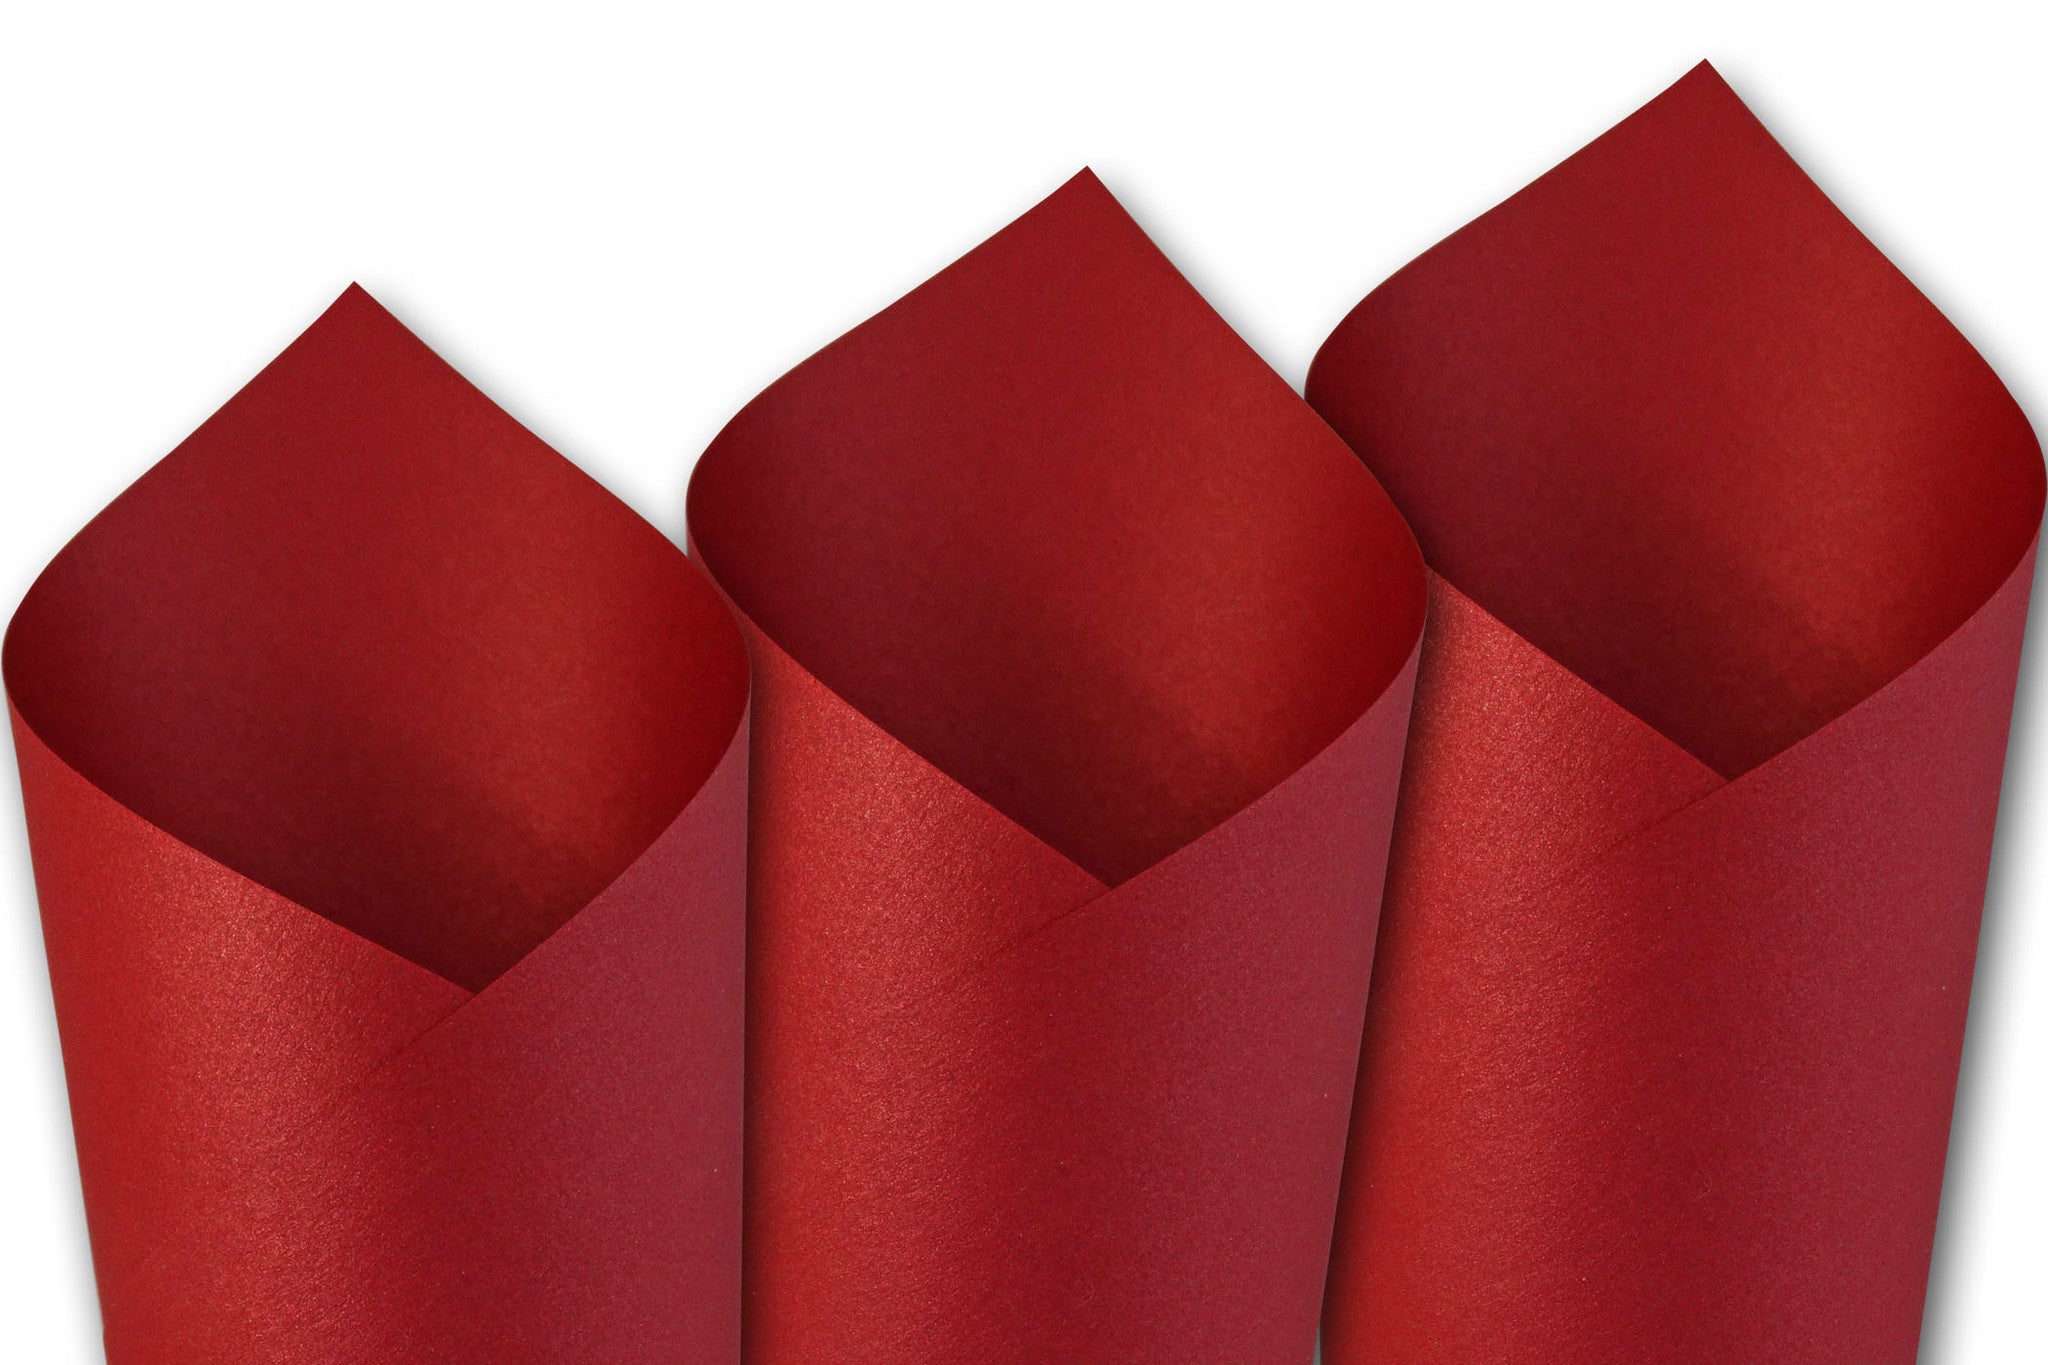 Premium Quality 8.5 x 11 RED & MAROON CARDSTOCK PAPER - 20 Sheets